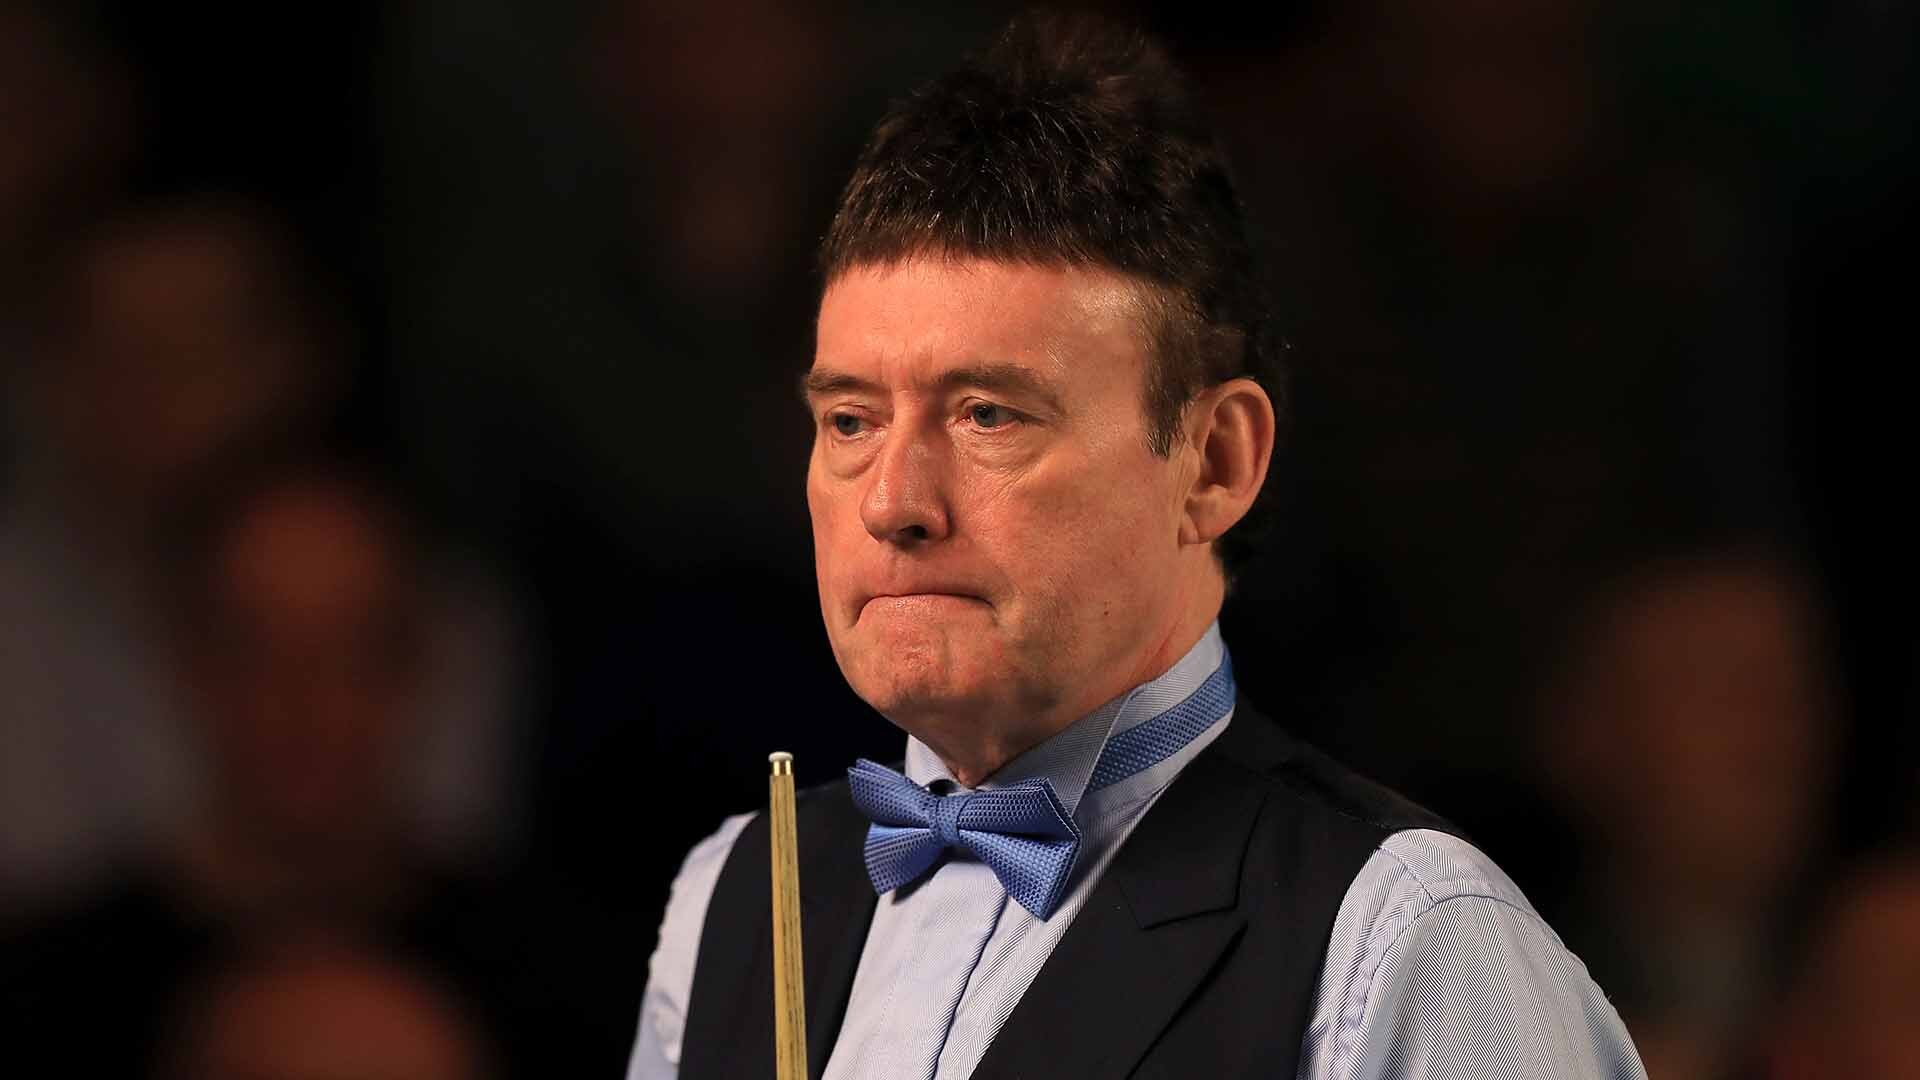 Snooker results Jimmy White qualifies for German Masters but UK champion Mark Allen crashes out